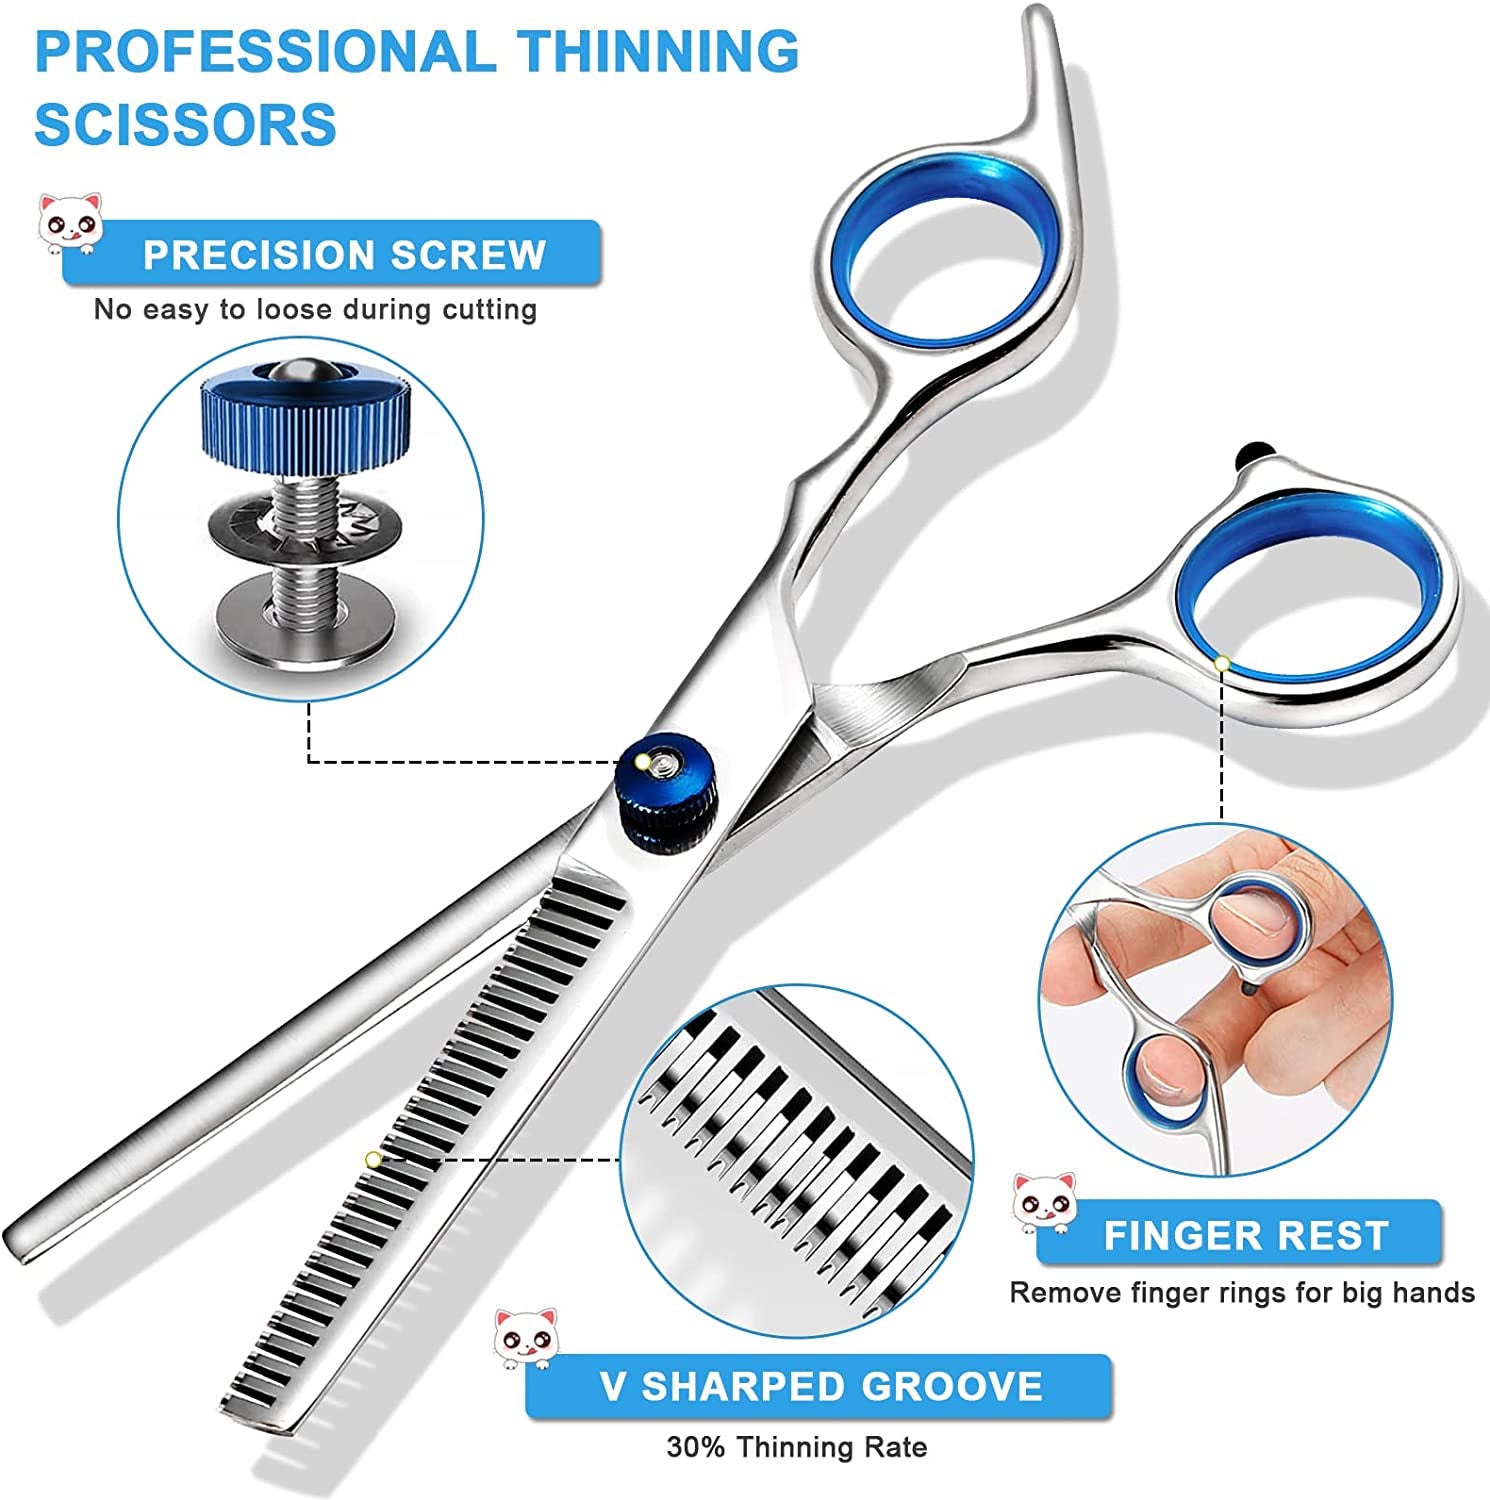 Dog Grooming Scissors Kit with Safety round Tips, Liren Professional 3 in 1 Dog Grooming Shears Set, Sharp and Durable Pet Grooming Shears for Dogs and Cats